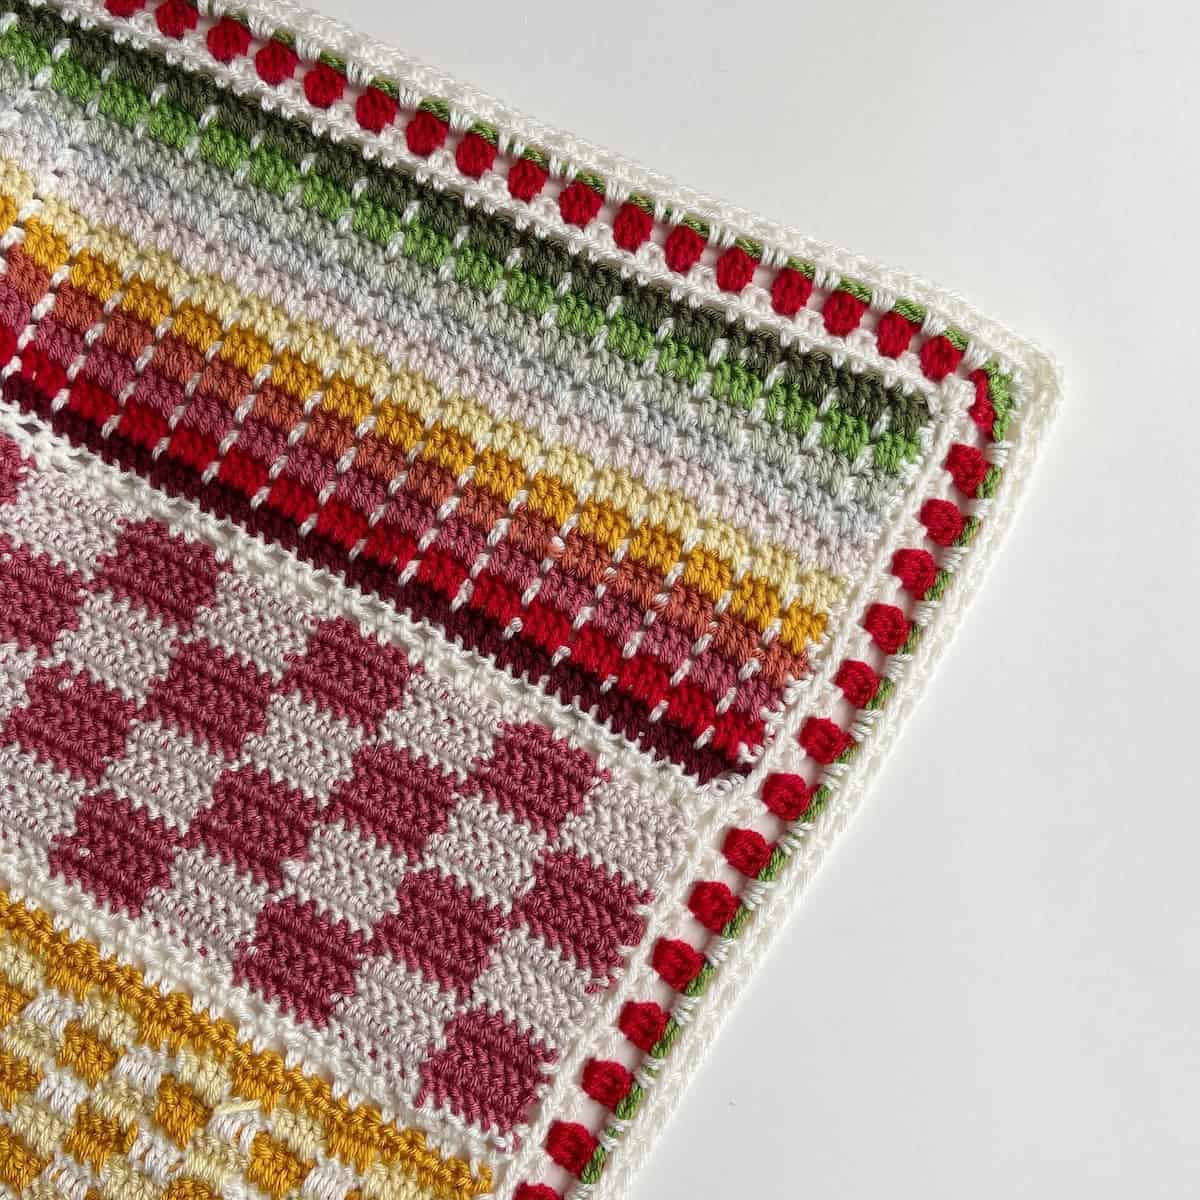 Close up of colorful crochet blanket pattern with strawberry crochet stitch border.